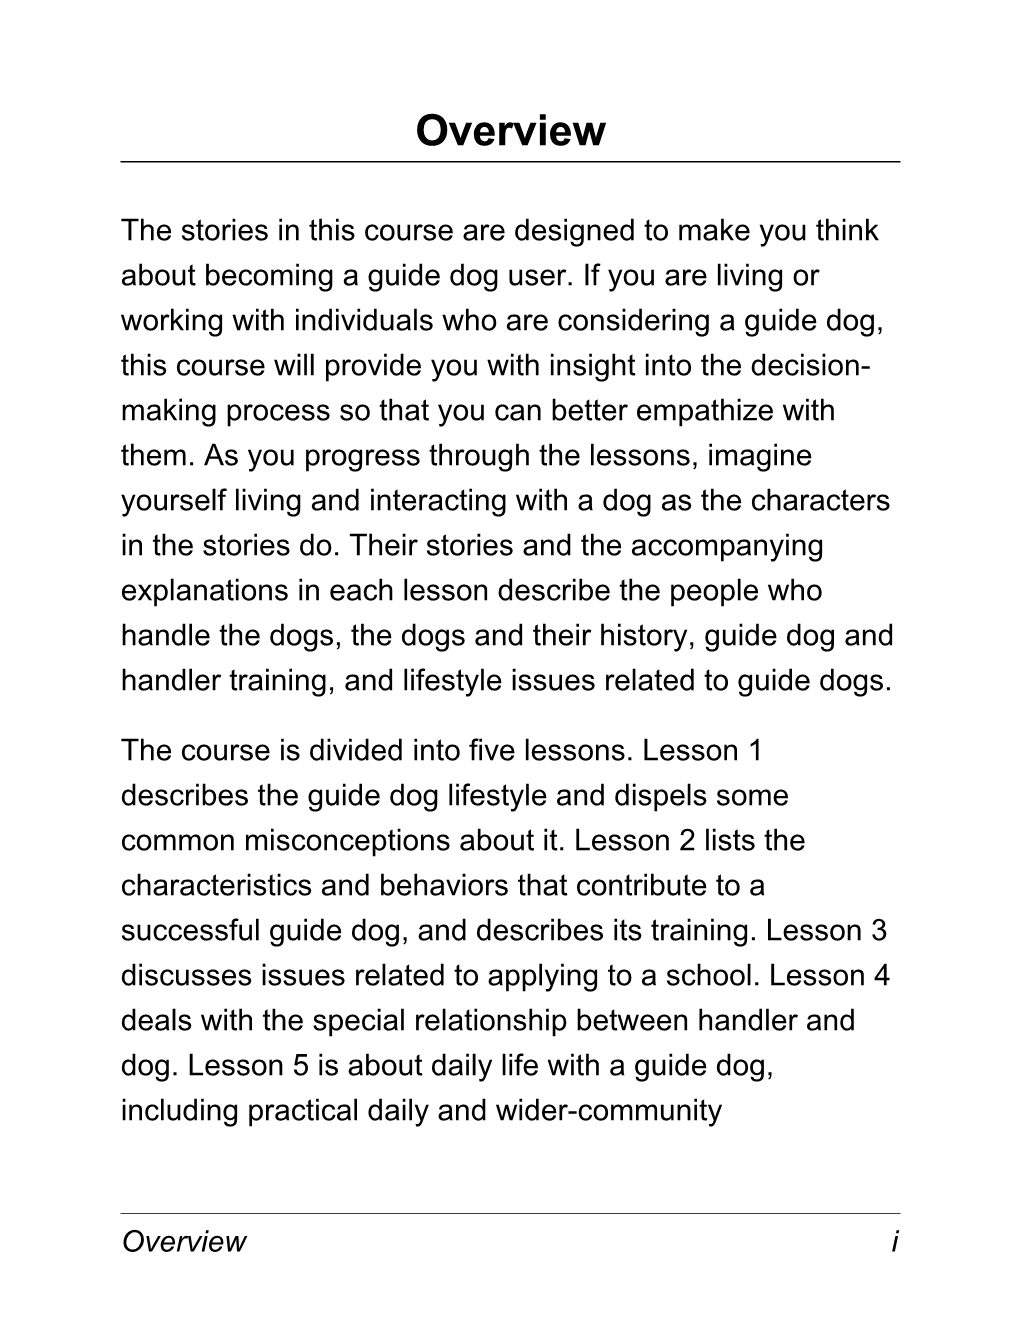 The Stories in This Course Are Designed to Make You Think About Becoming a Guide Dog User